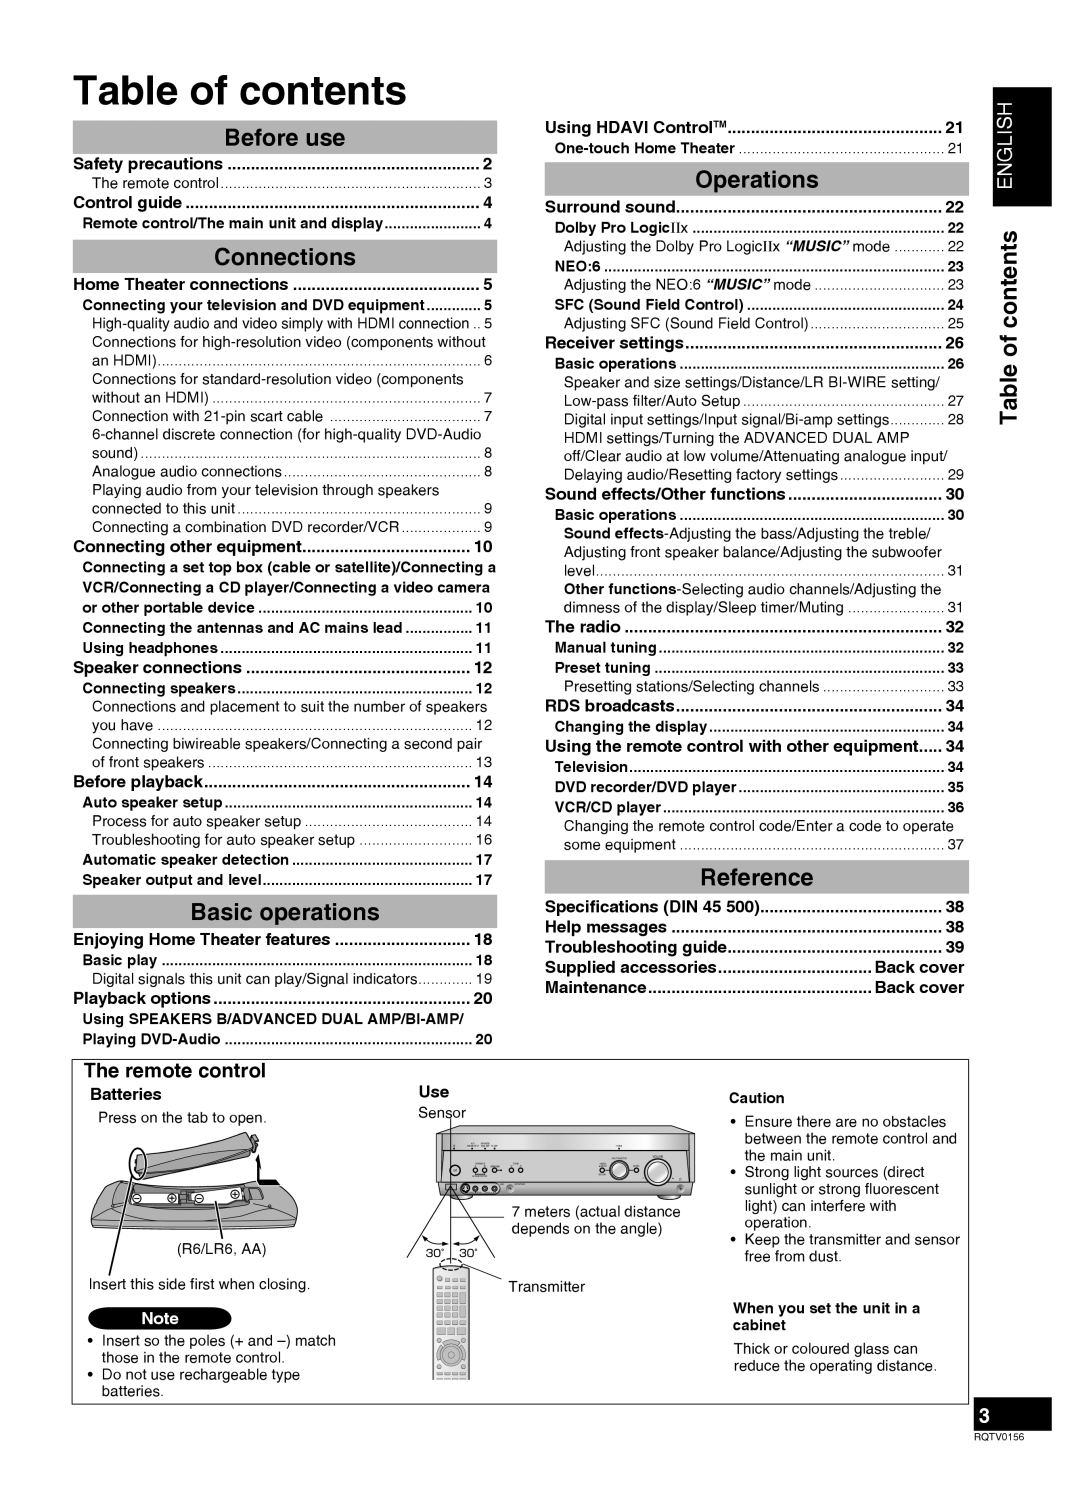 Panasonic SA-XR58 manual Operations, Reference, Table of contents ENGLISH, Before use, Connections, Basic operations 